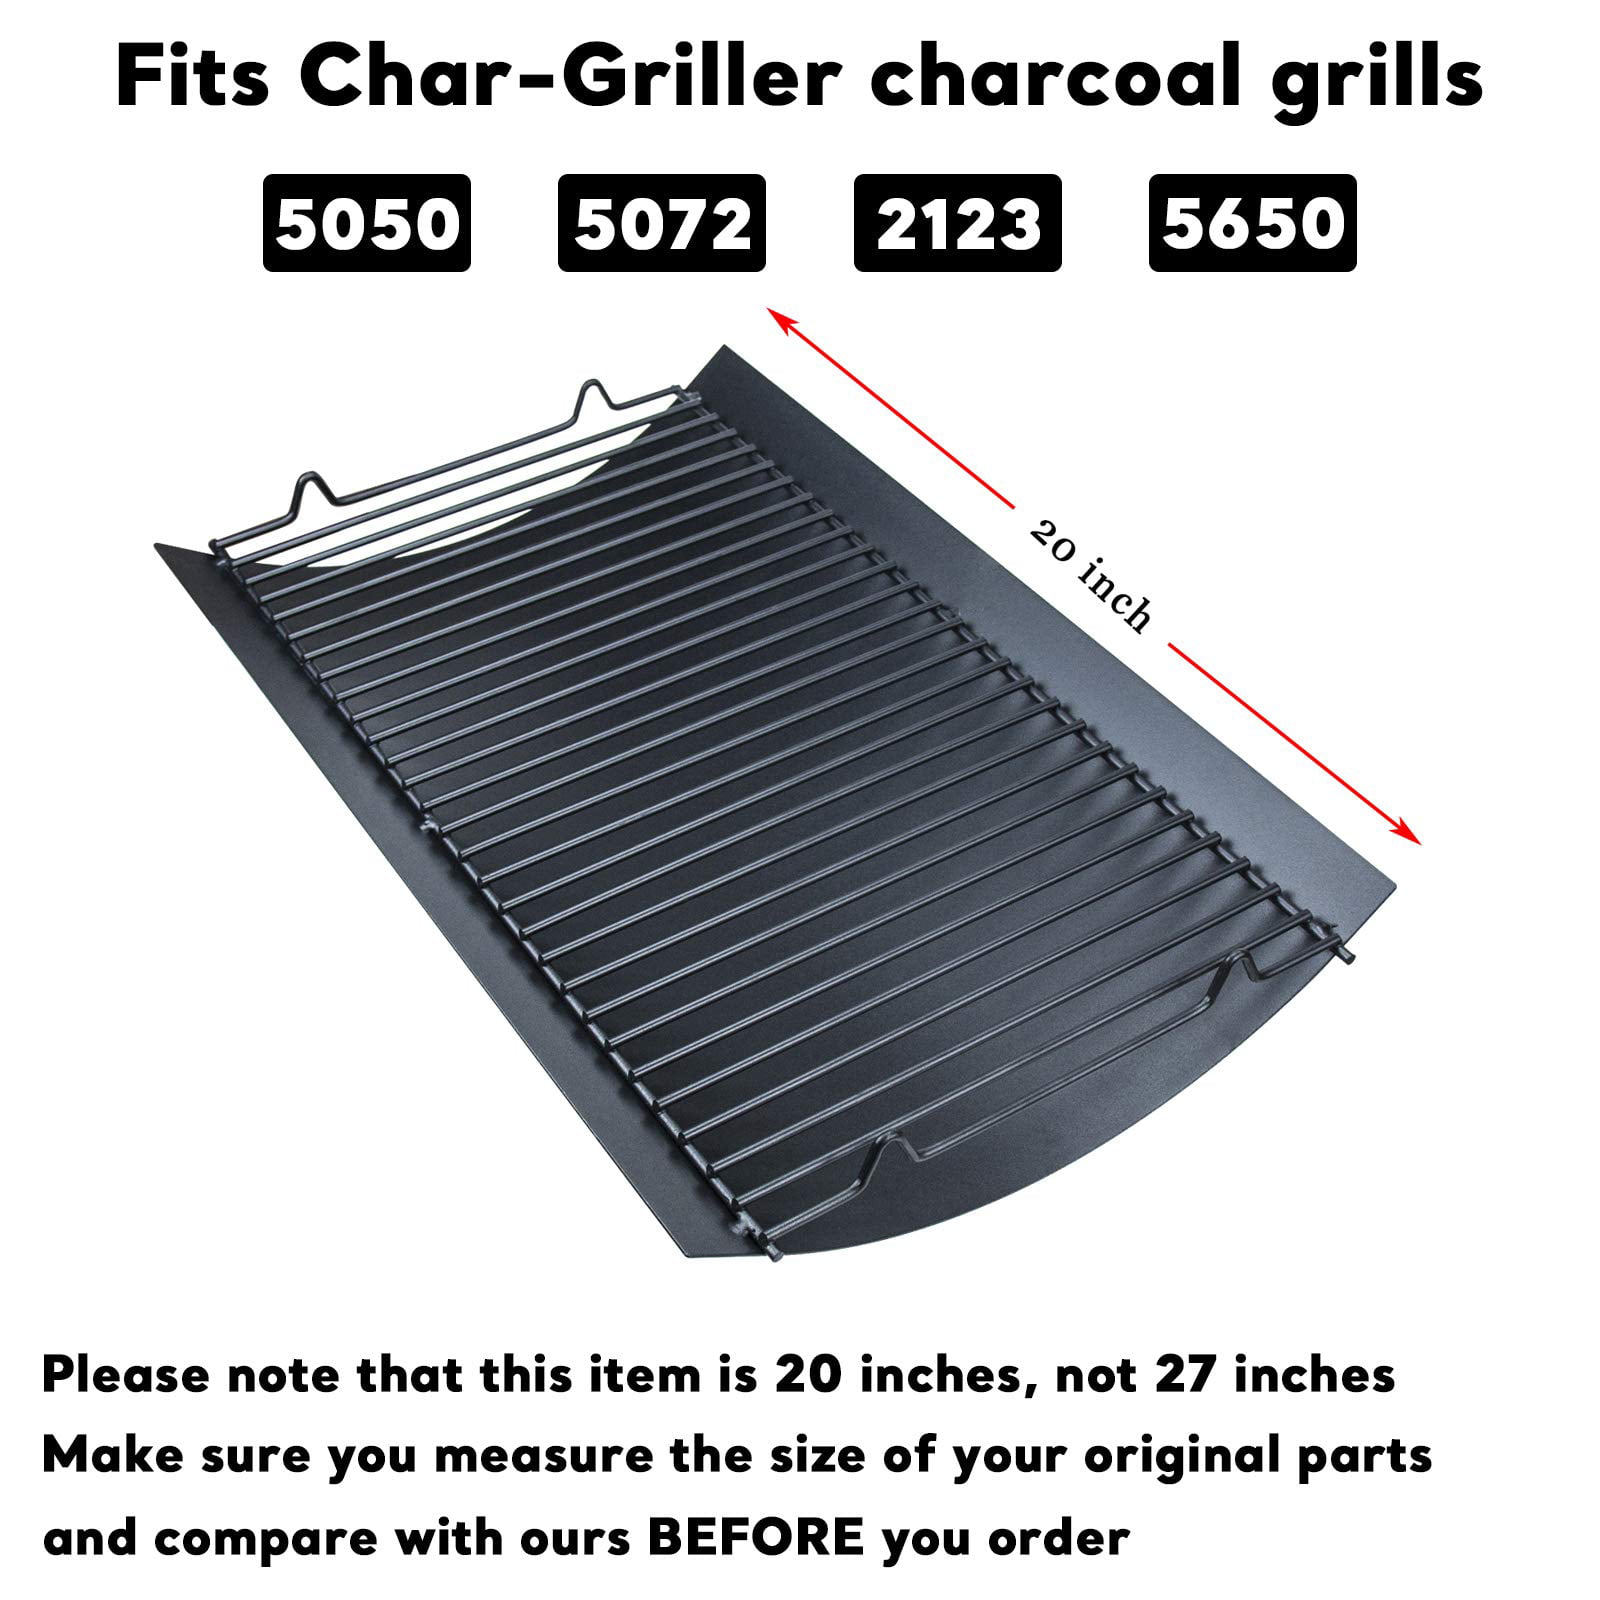 5072 Hisencn 20 inch Ash pan for Chargriller 5050 2123 Charcoal Grills, 5650 